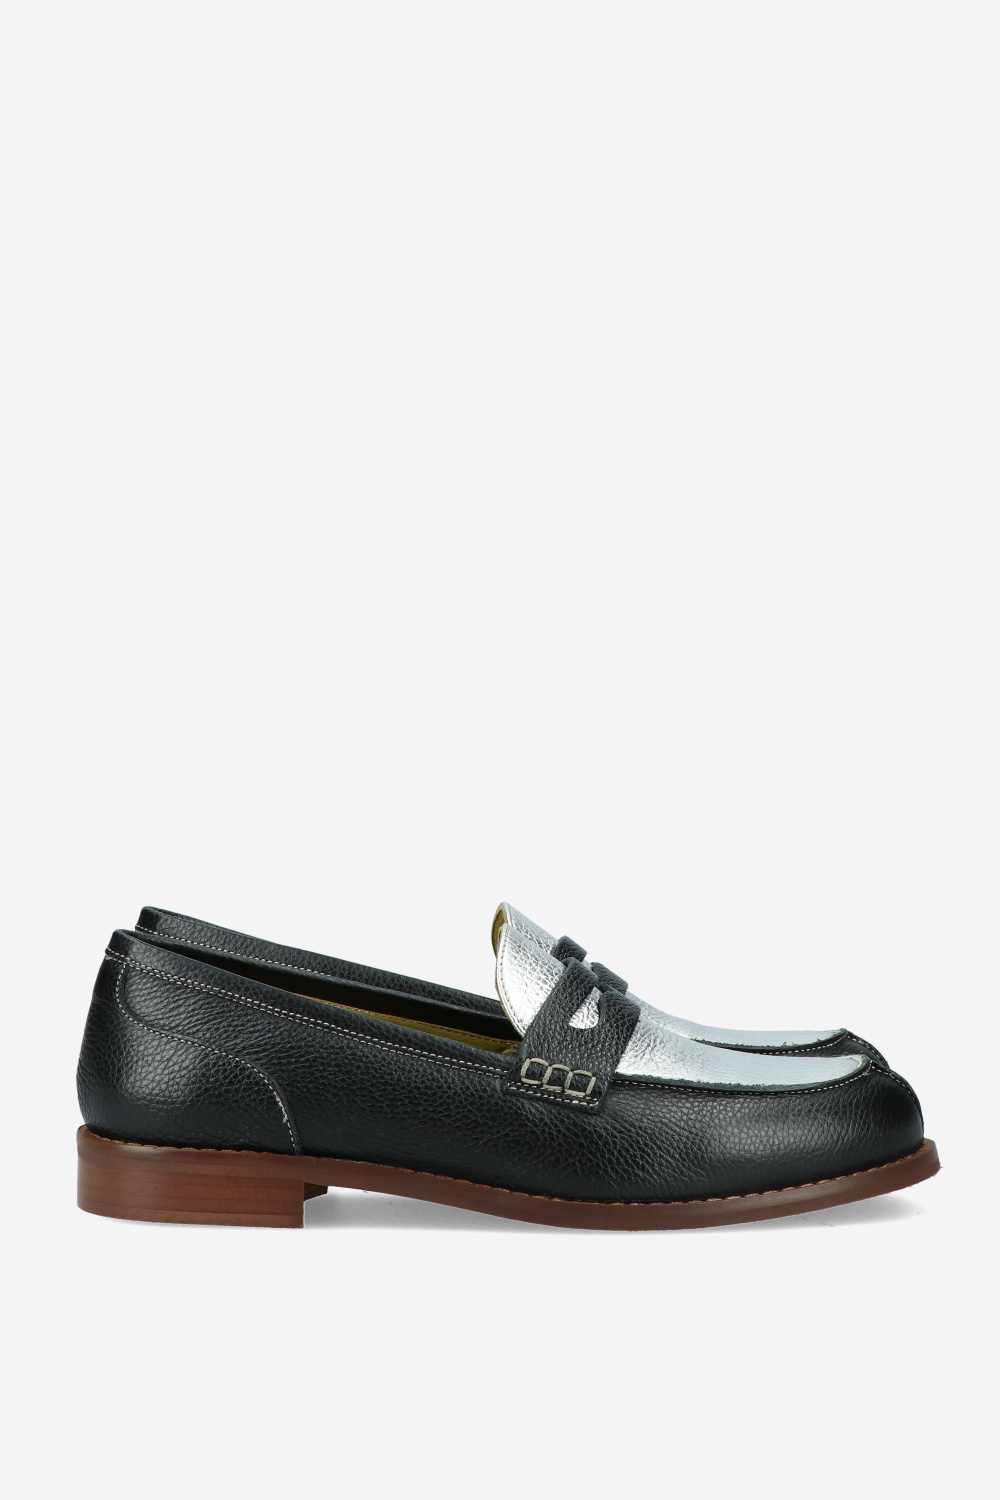 Laura Ricci Loafers Black